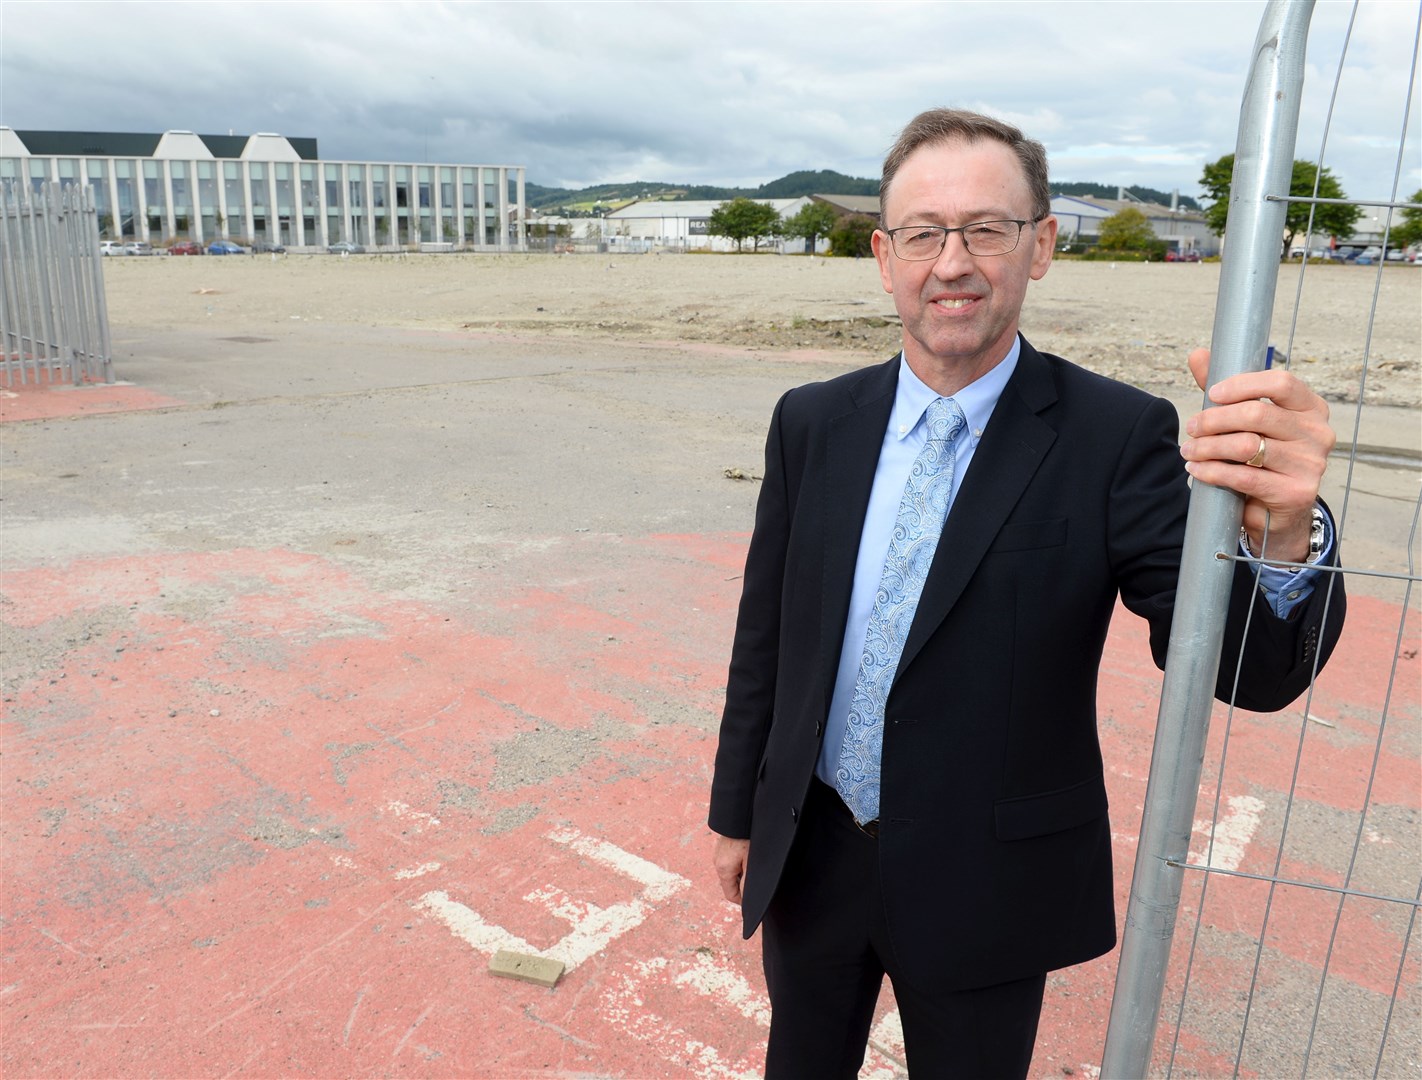 Chamber of Commerce chief executive Stewart Nicol at the former college site.